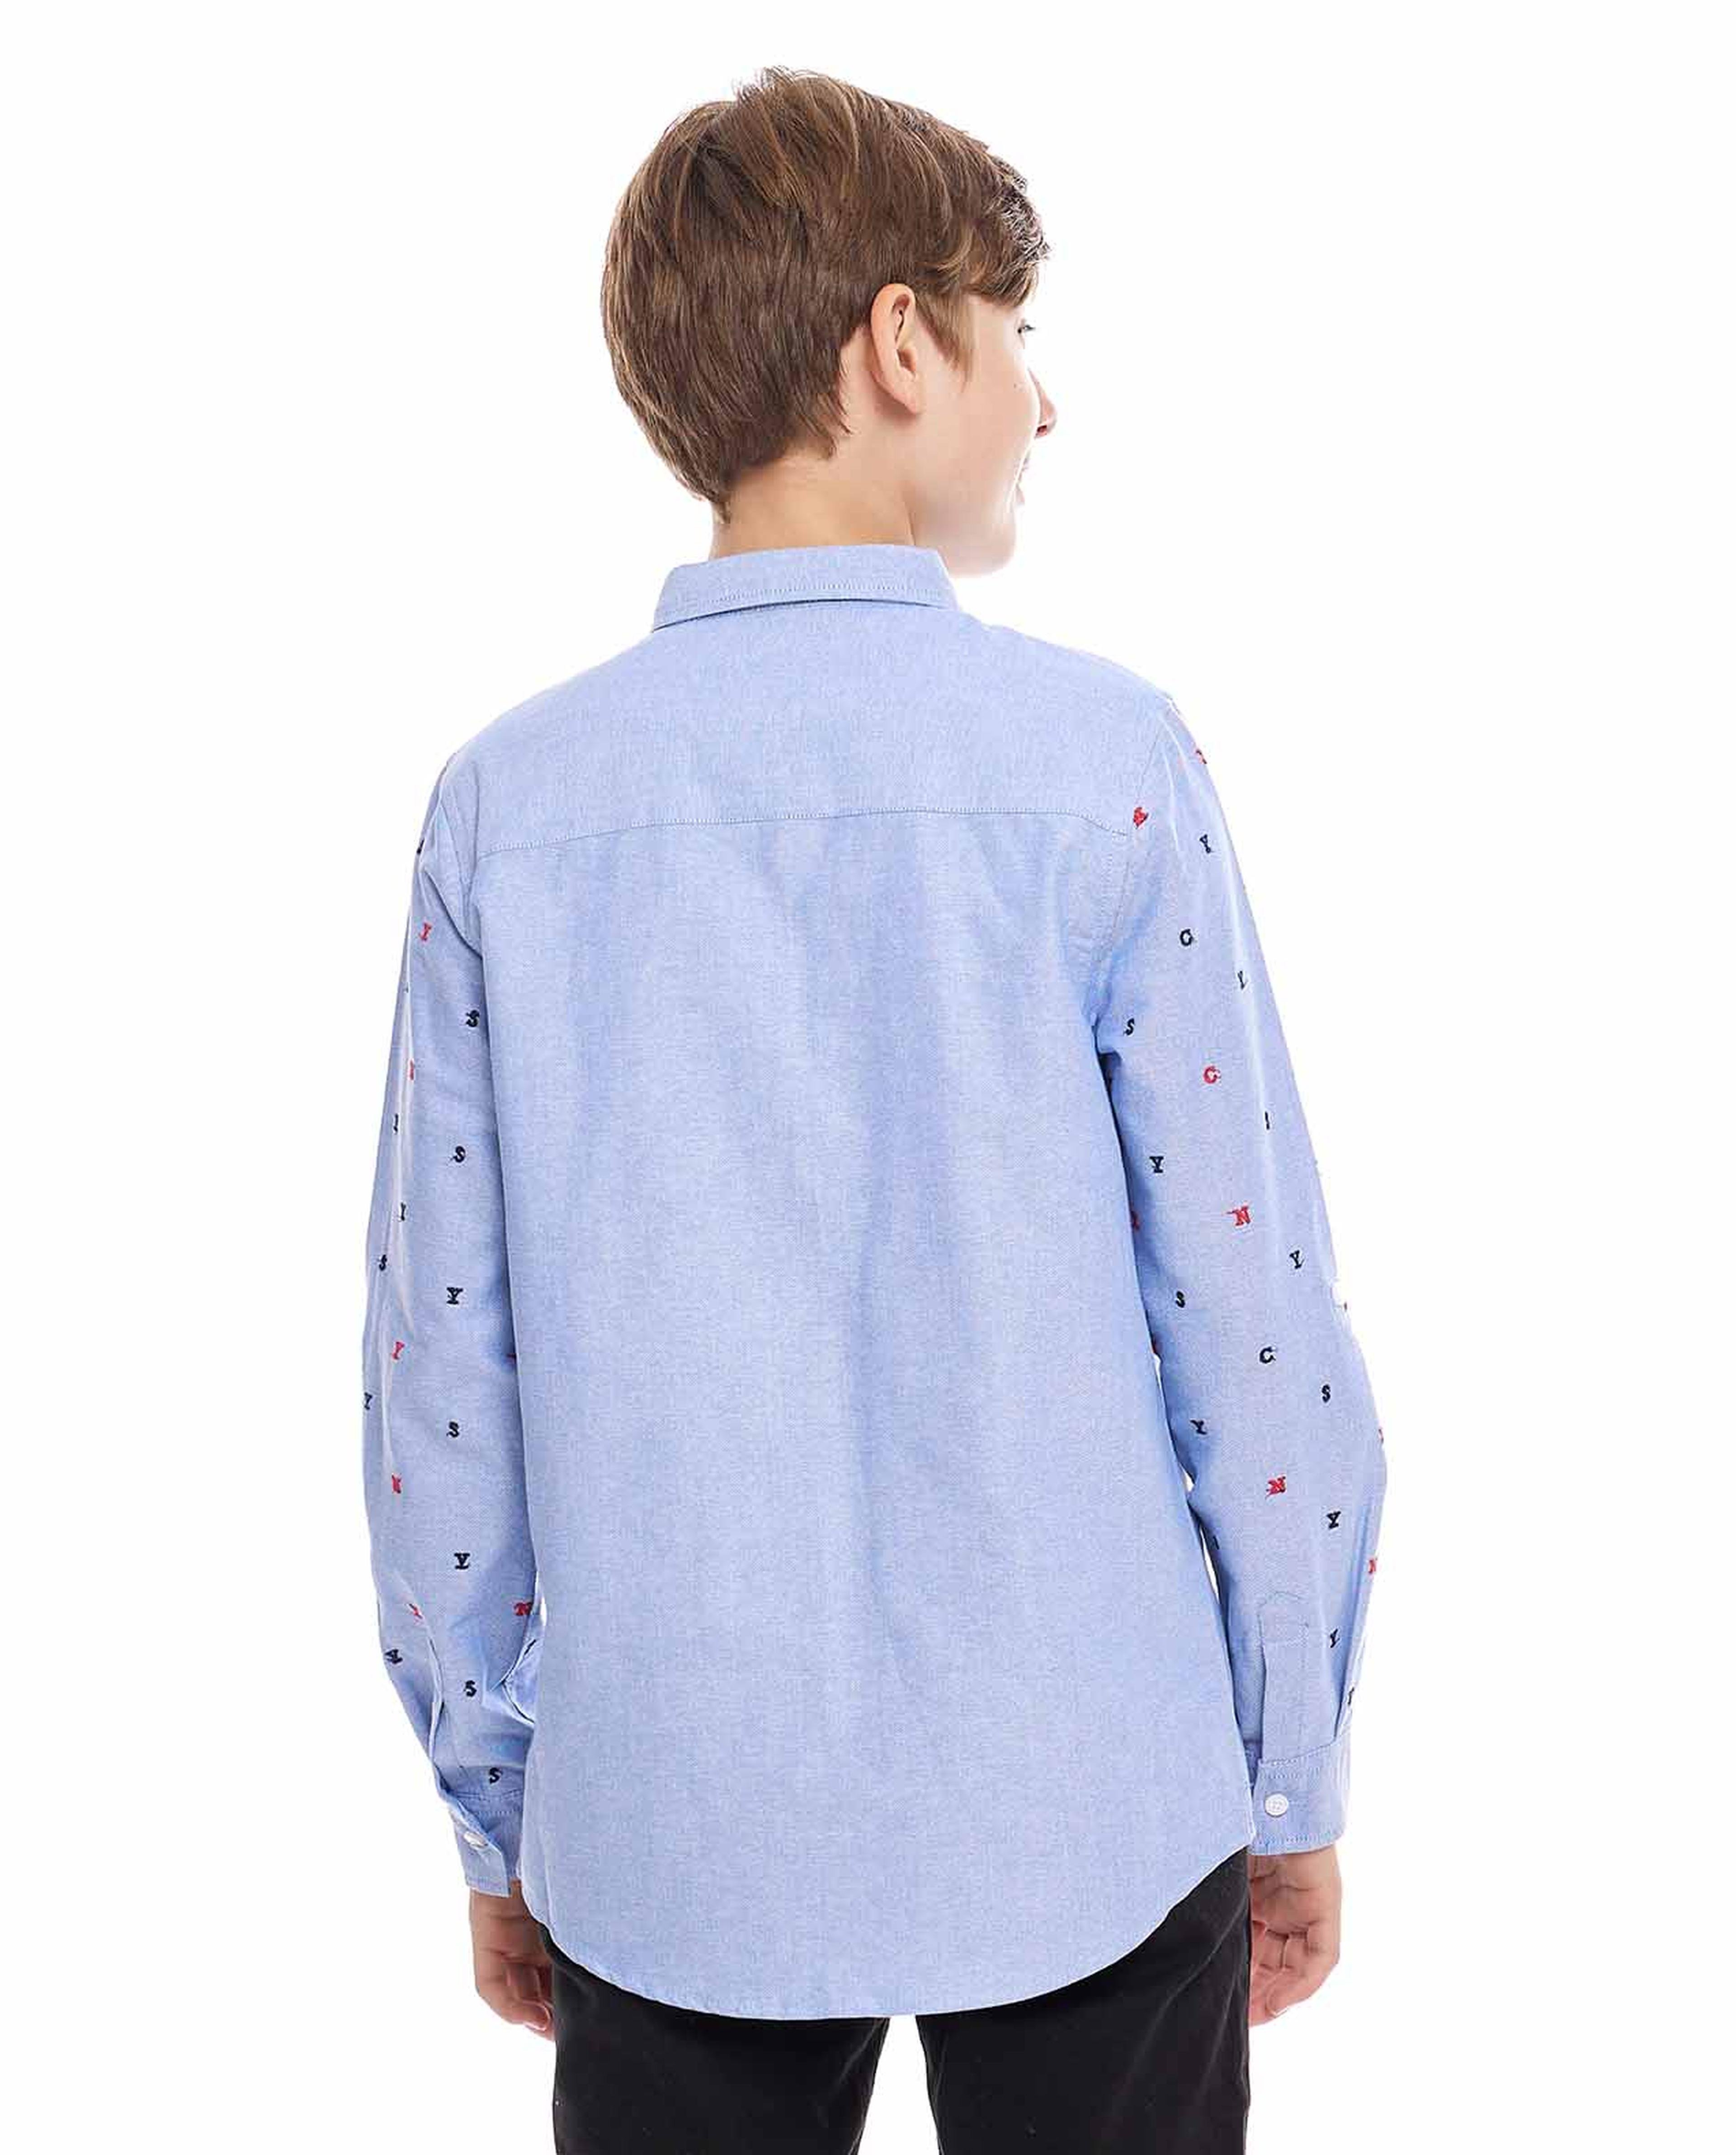 Embroidered Shirt with Spread Collar and Long Sleeves